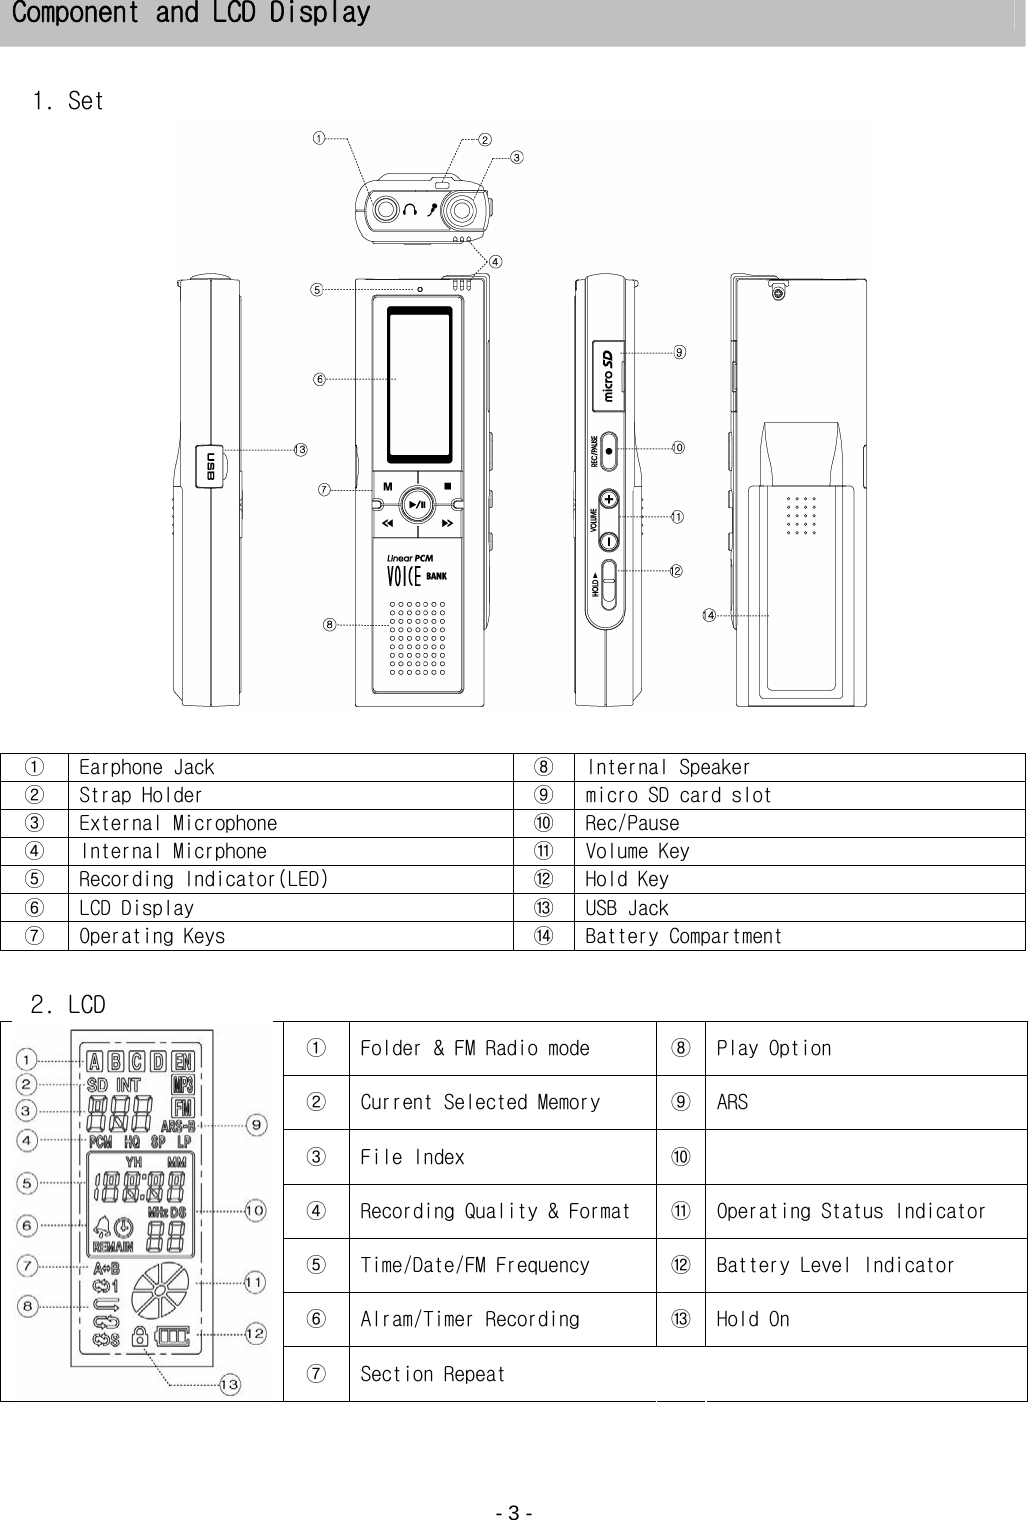    - 3 - Component and LCD Display  1. Set   ①  Earphone Jack  ⑧  Internal Speaker ②  Strap Holder  ⑨  micro SD card slot ③  External Microphone   ⑩  Rec/Pause ④  Internal Micrphone  ⑪  Volume Key ⑤  Recording Indicator(LED)  ⑫  Hold Key ⑥  LCD Display  ⑬  USB Jack ⑦  Operating Keys  ⑭  Battery Compartment   2. LCD ①  Folder &amp; FM Radio mode   ⑧ Play Option ②  Current Selected Memory  ⑨ ARS ③  File Index  ⑩  ④  Recording Quality &amp; Format  ⑪ Operating Status Indicator ⑤  Time/Date/FM Frequency  ⑫ Battery Level Indicator ⑥  Alram/Timer Recording  ⑬ Hold On ⑦  Section Repeat     